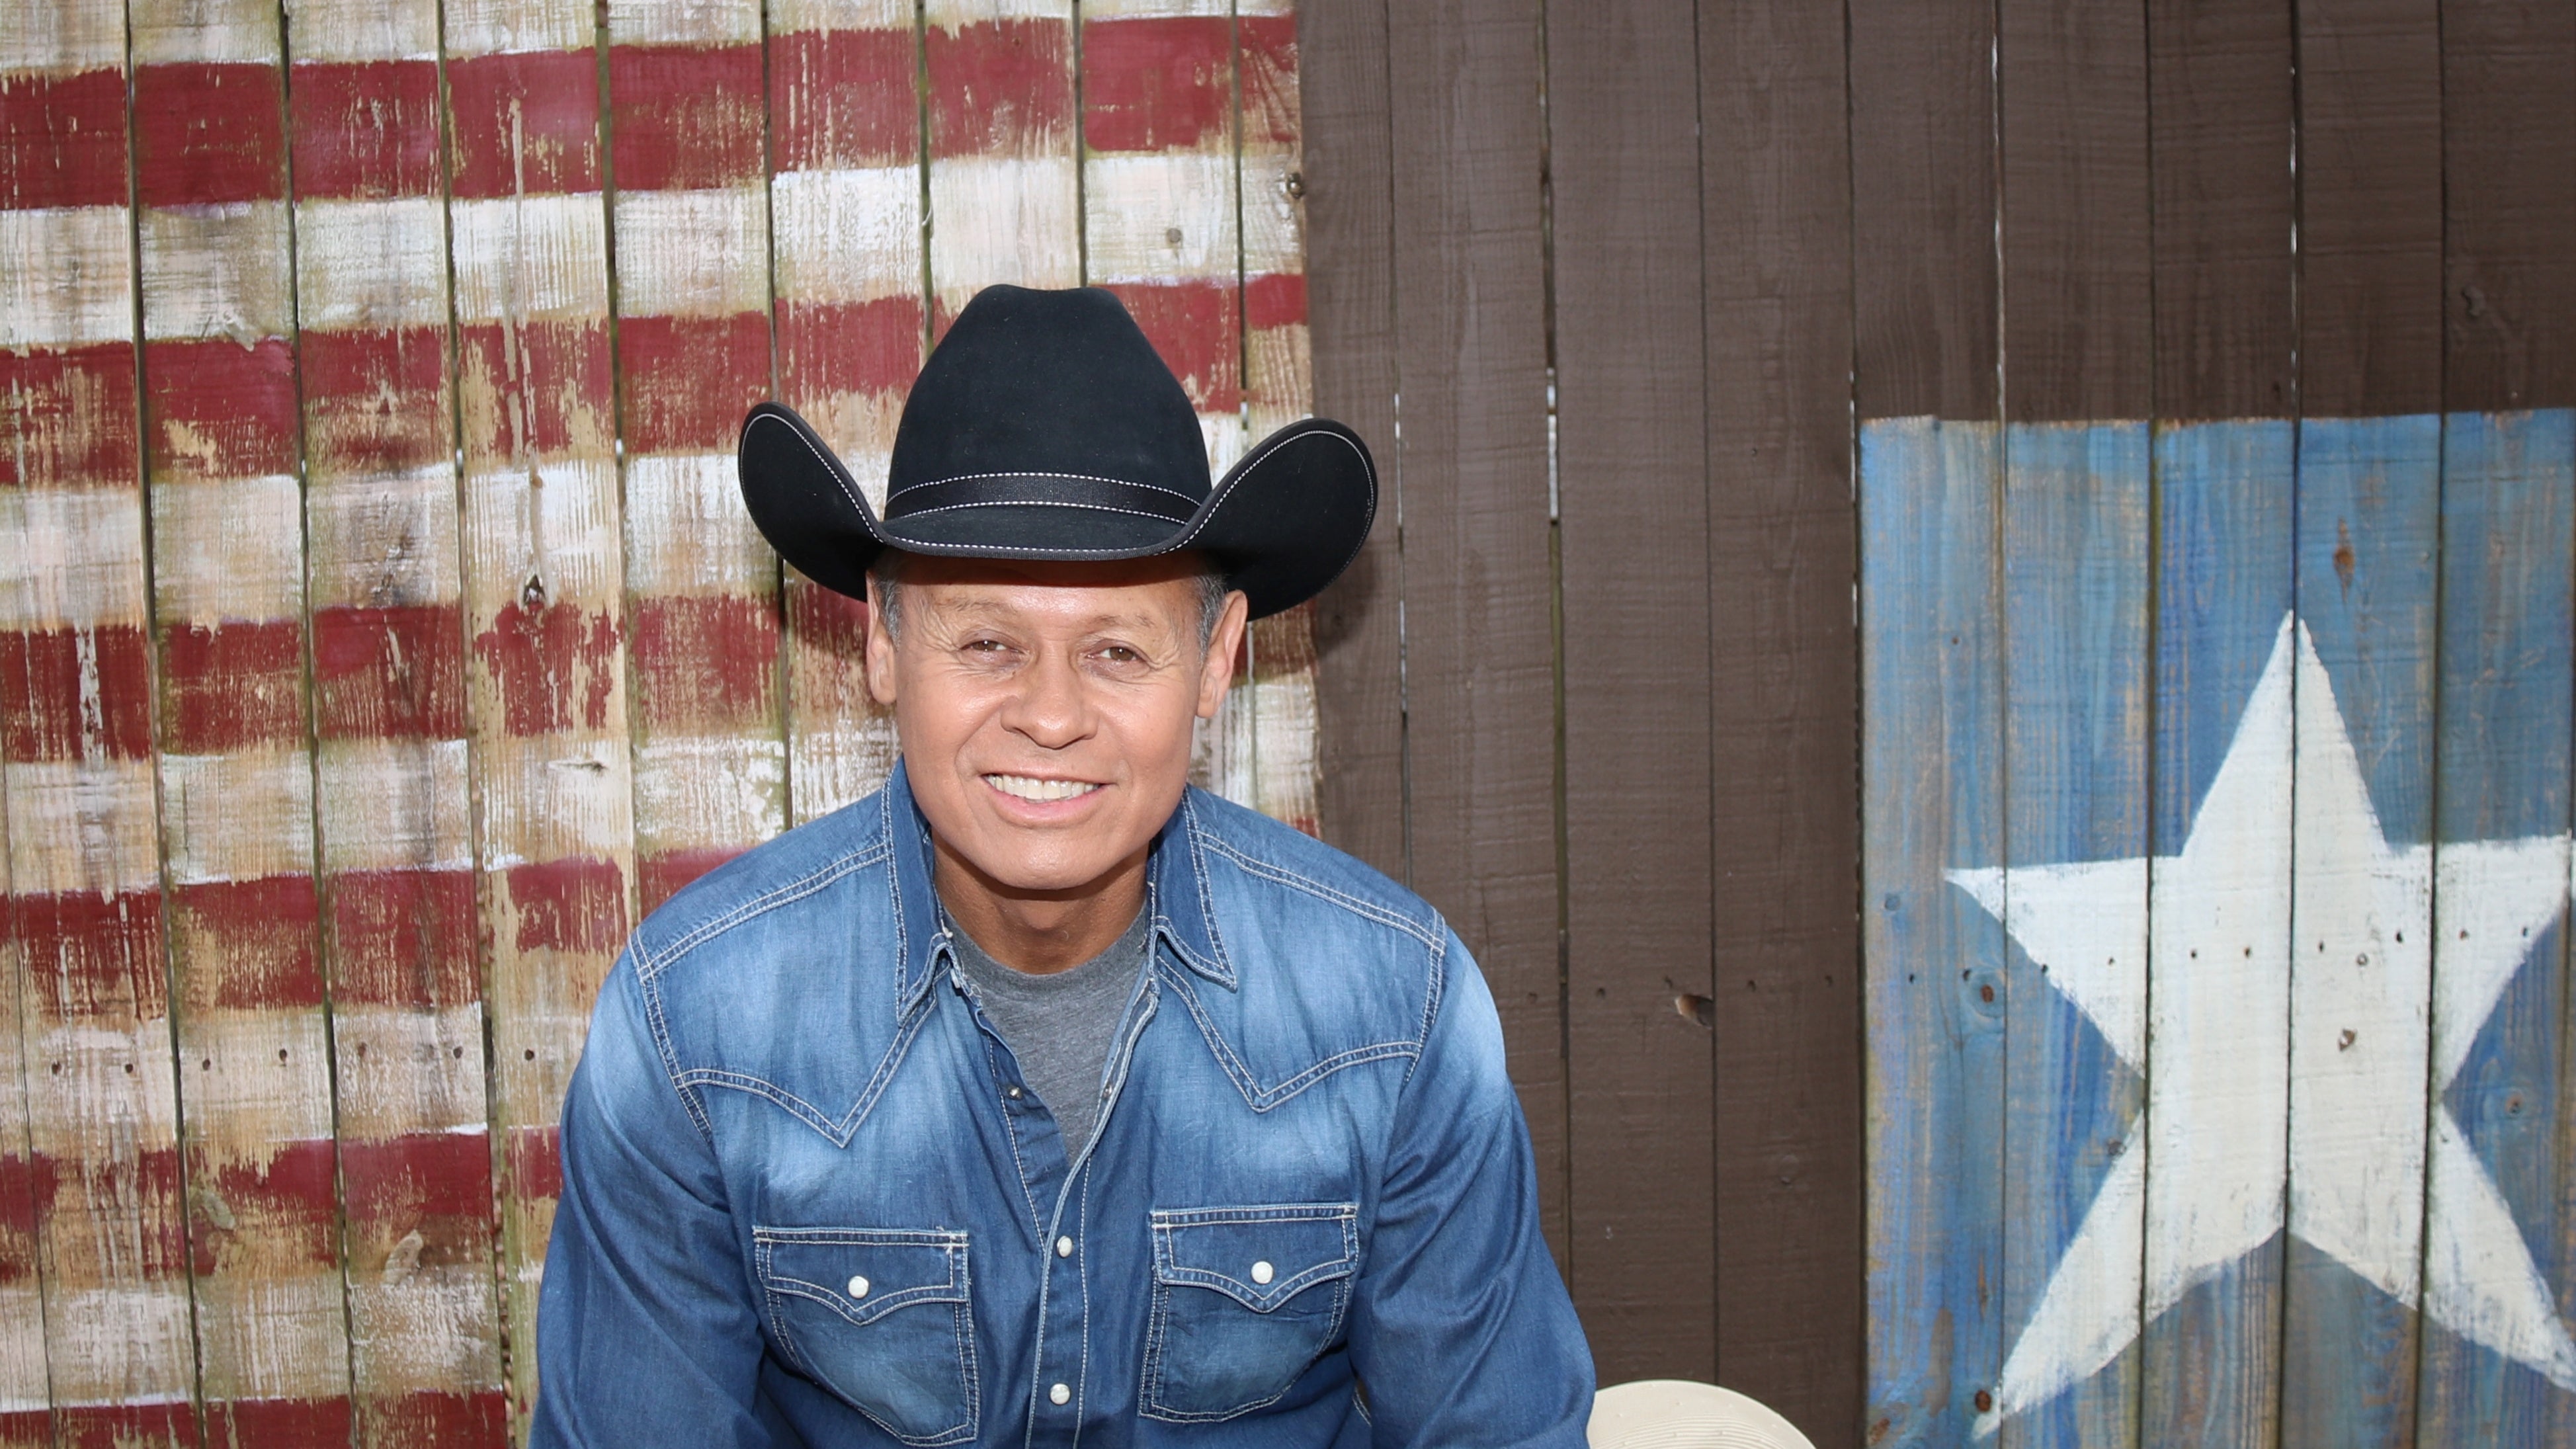 Neal McCoy at Blue Gate Performing Arts Center